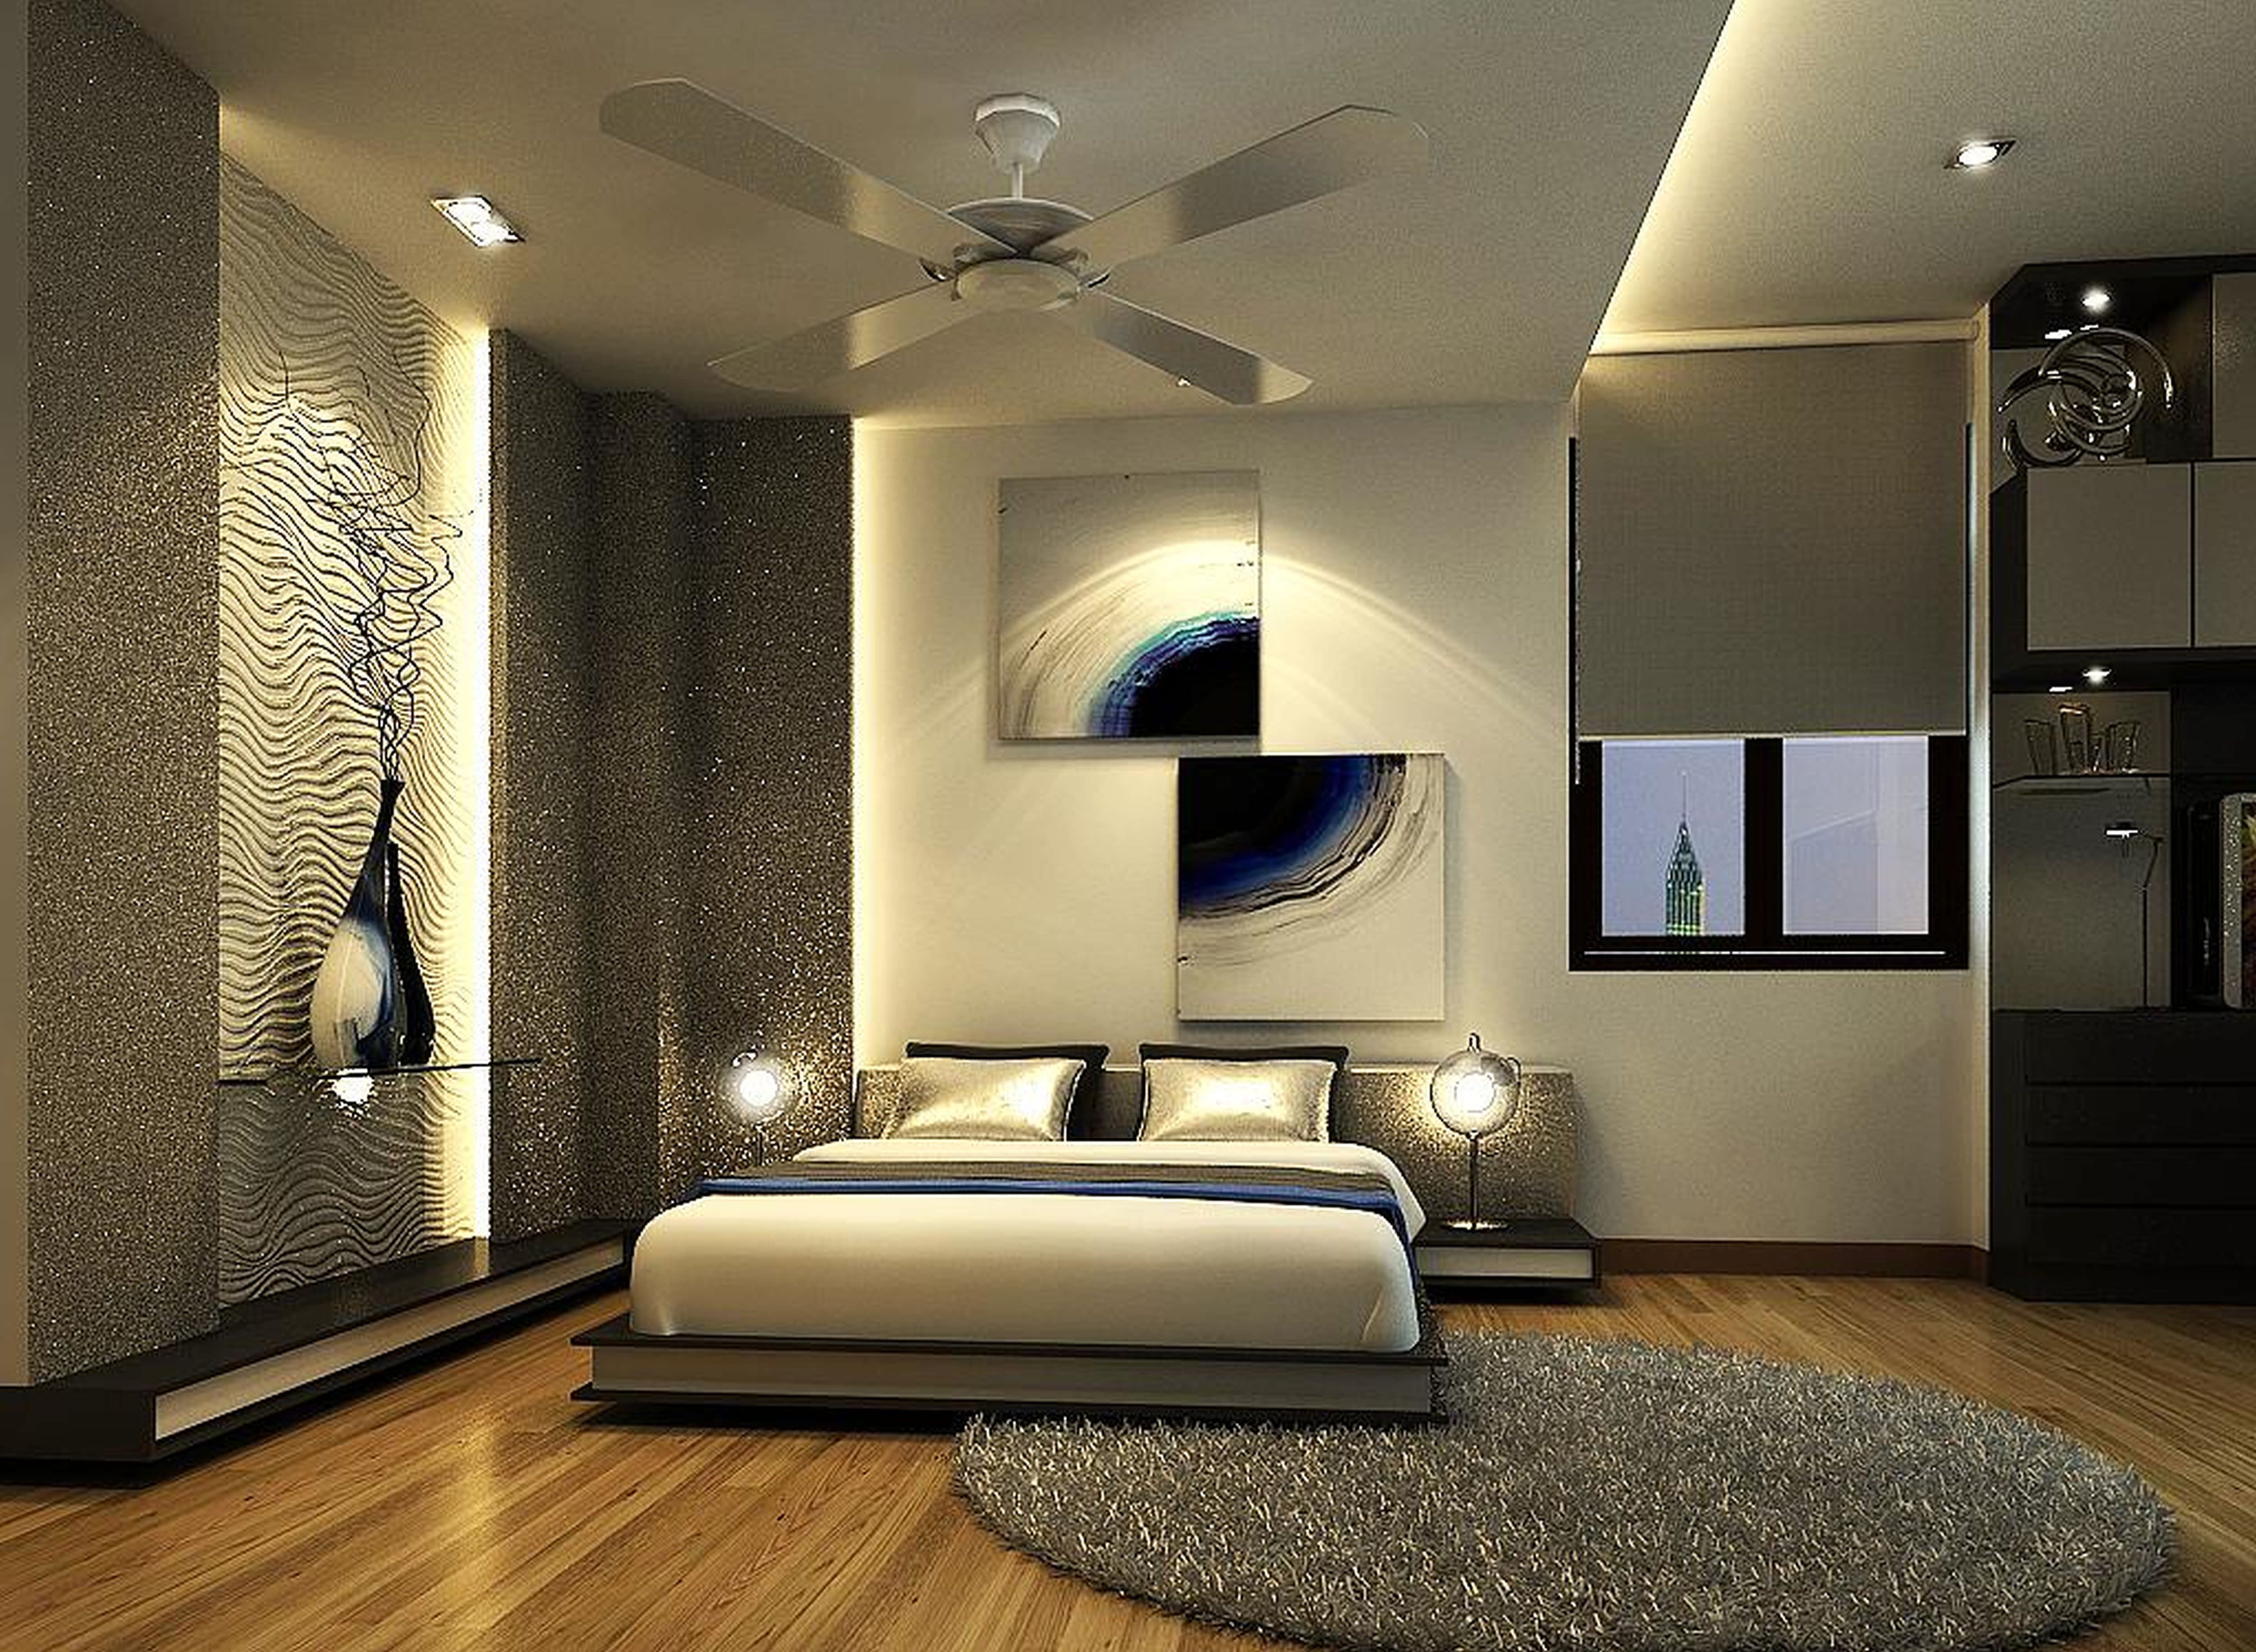 bedroom royal designs interior decorating bed bedrooms modern apartment trends space ceiling premium beds designed amazing looks